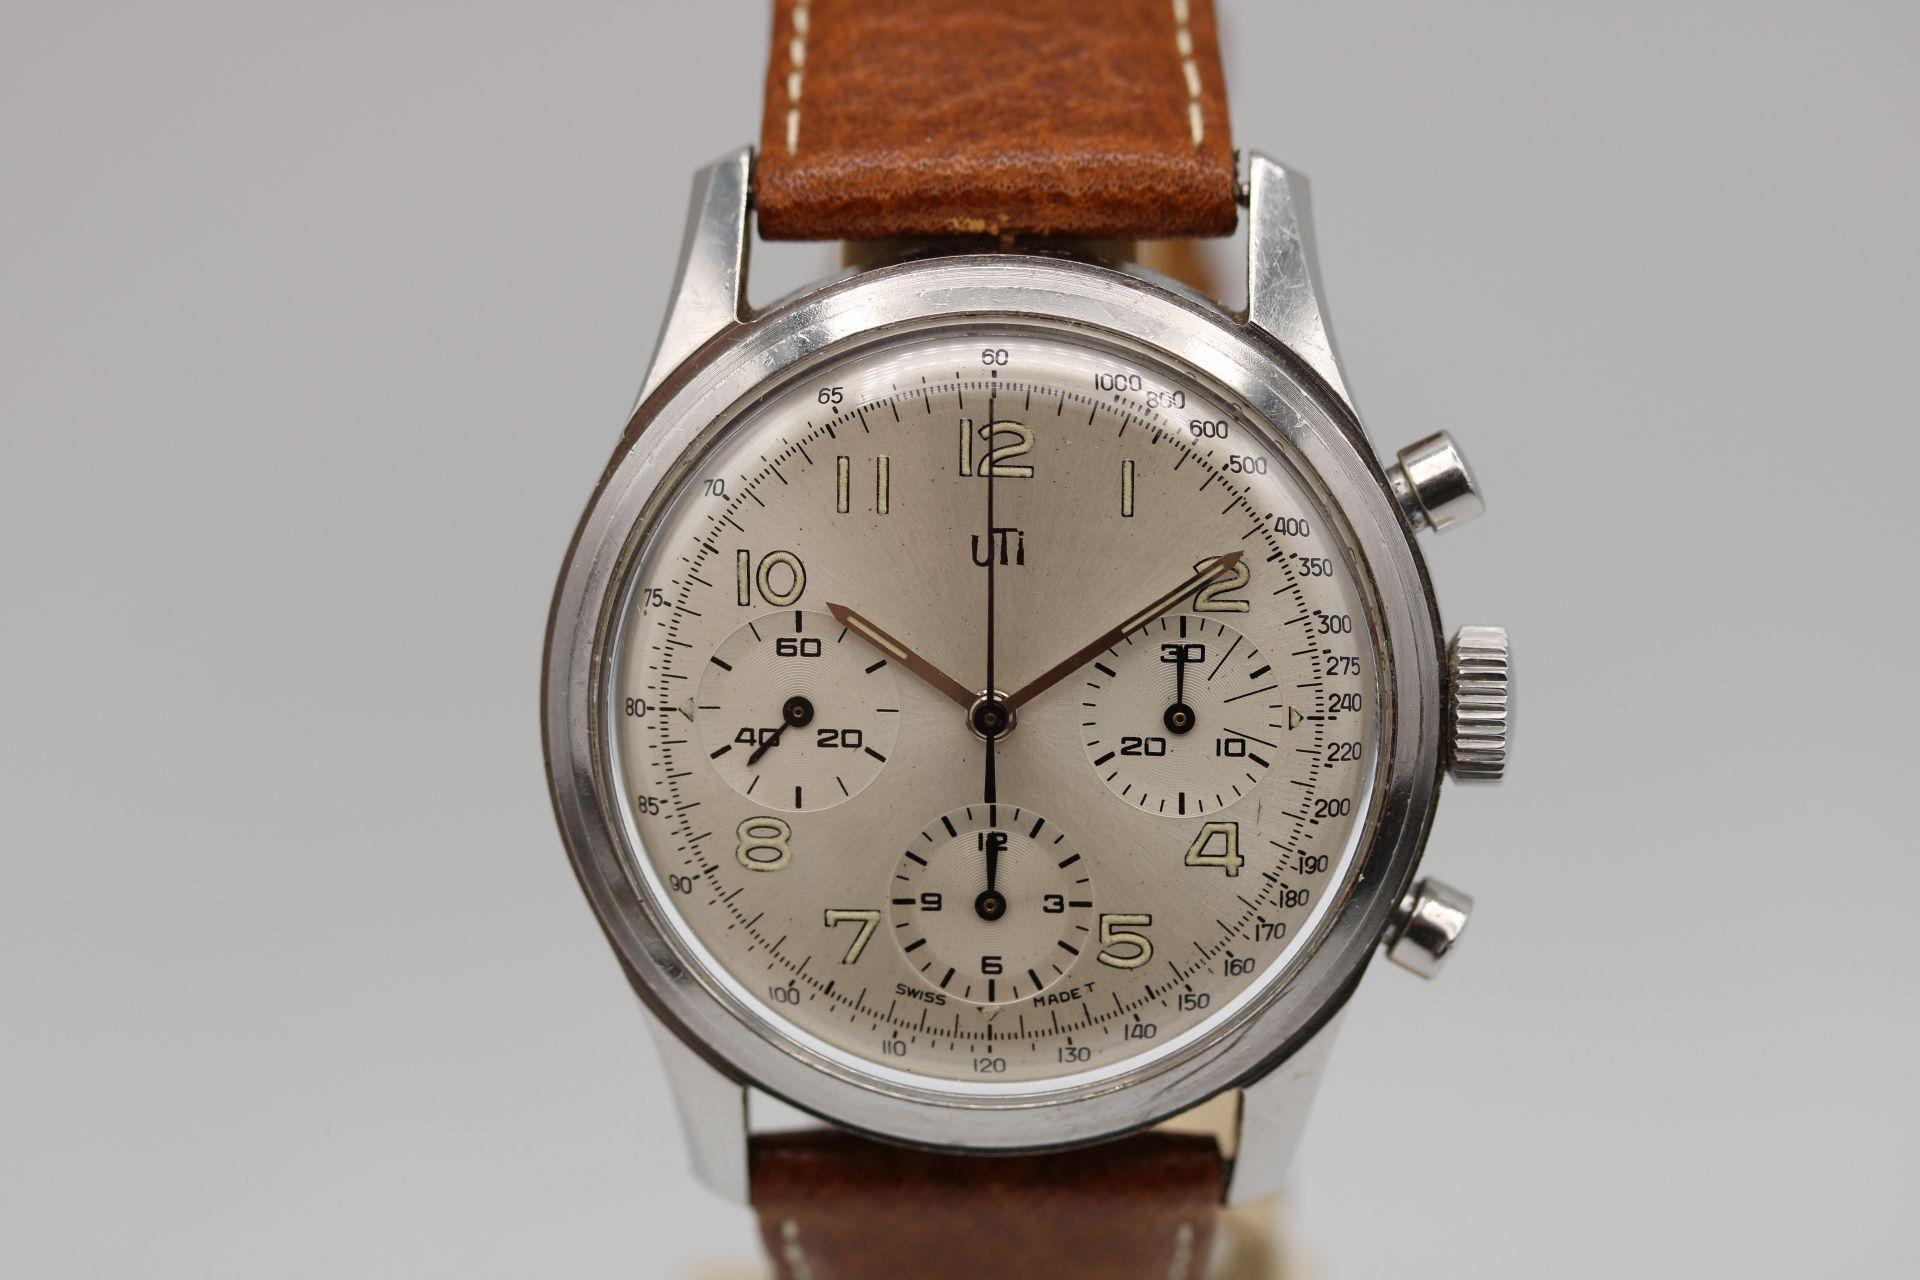  Breitling UTI Toptime Chronograph 17765-5 Watch Only  7